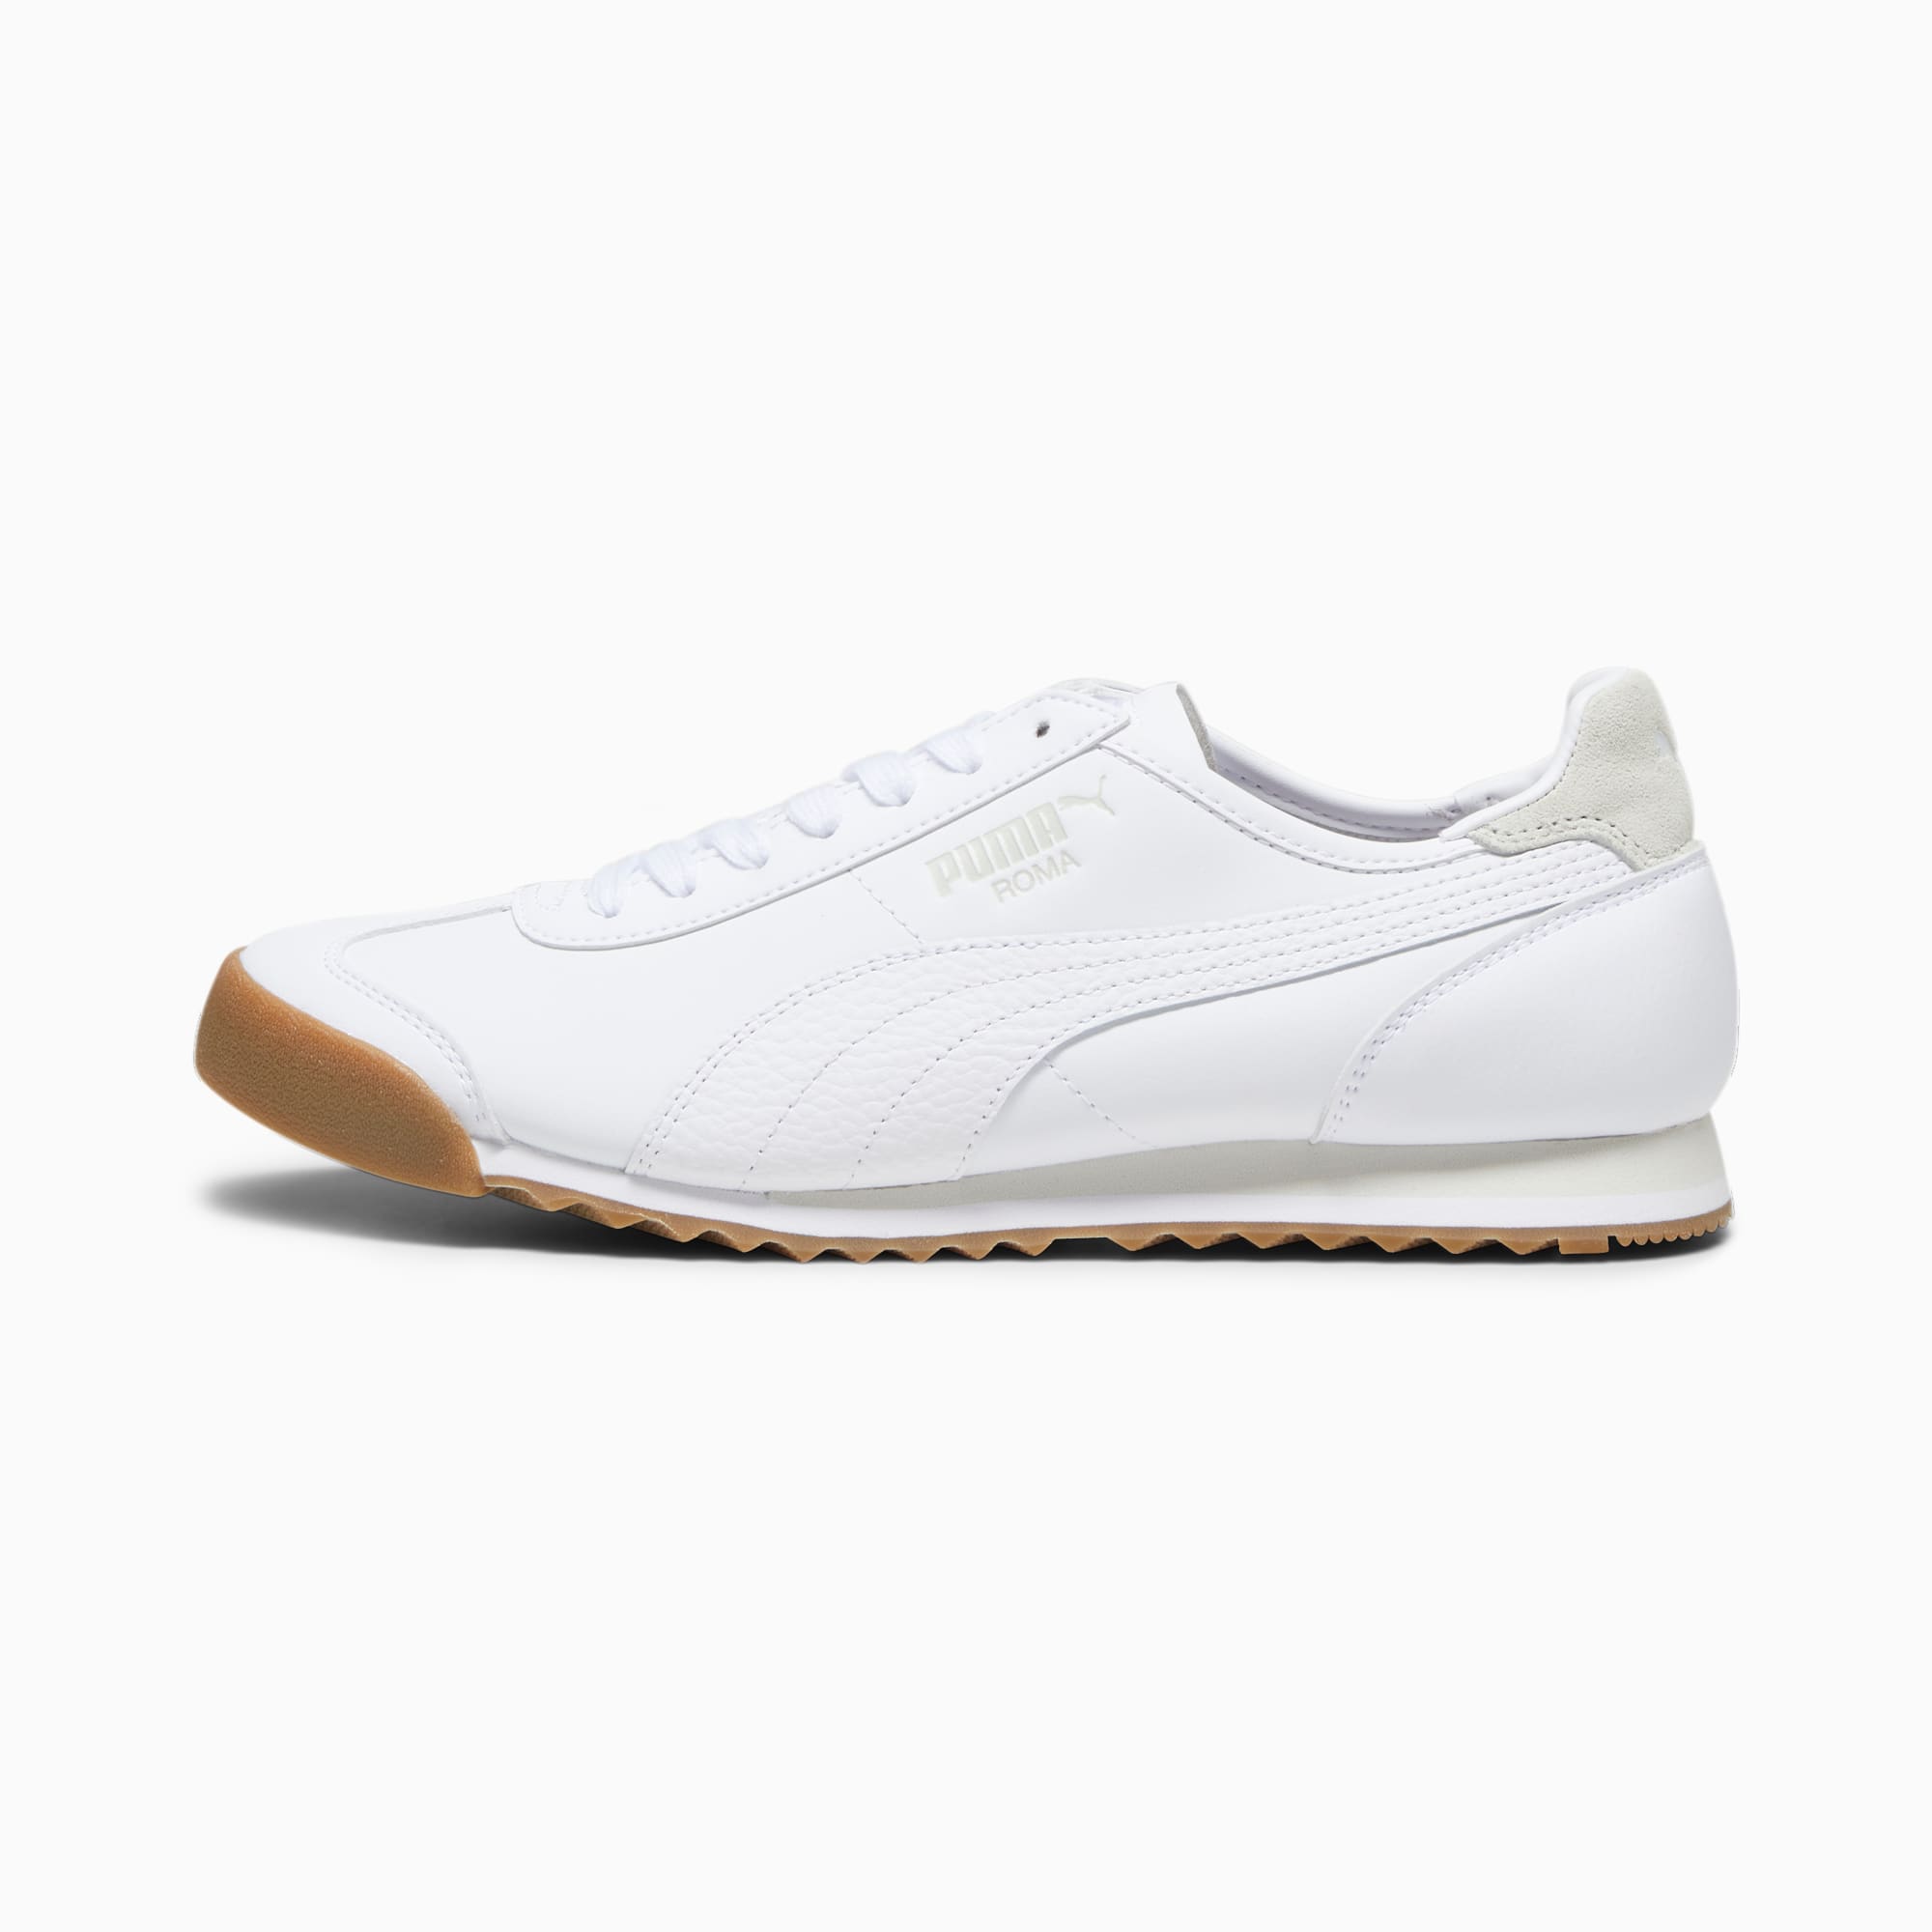 PUMA Chaussure Sneakers Roma OG Lth, Blanc/Gris